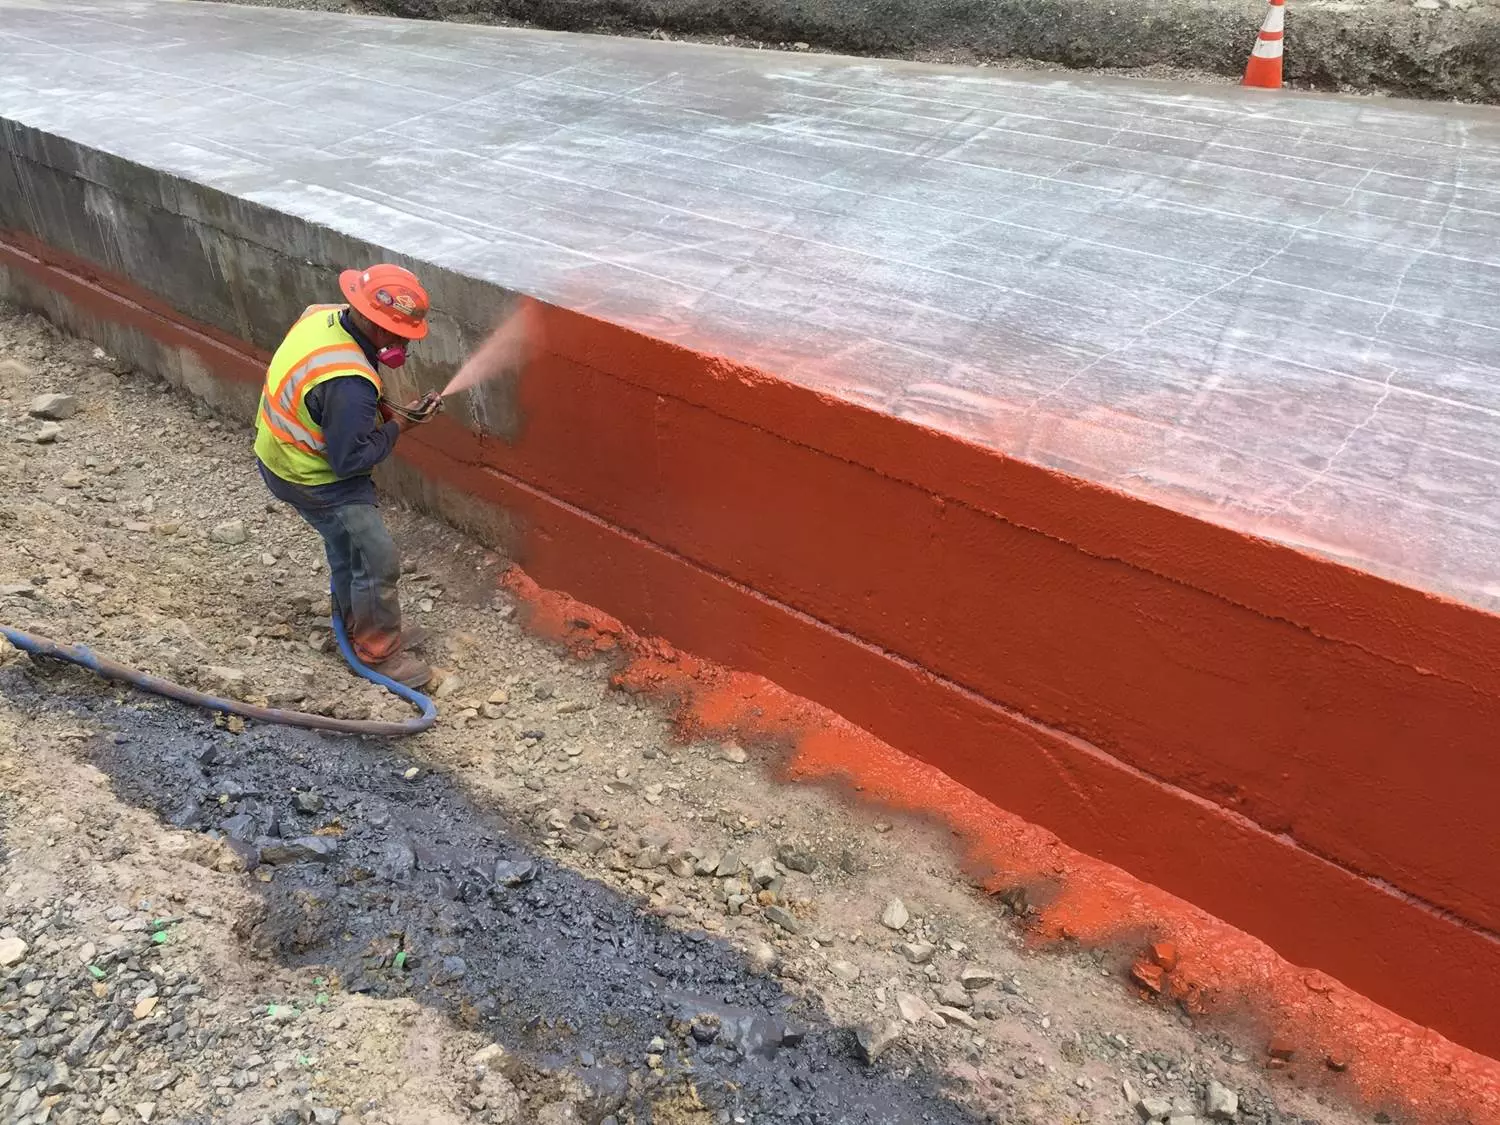 An image of one construction worker using a sprayer to apply an orange coating to a bridge.